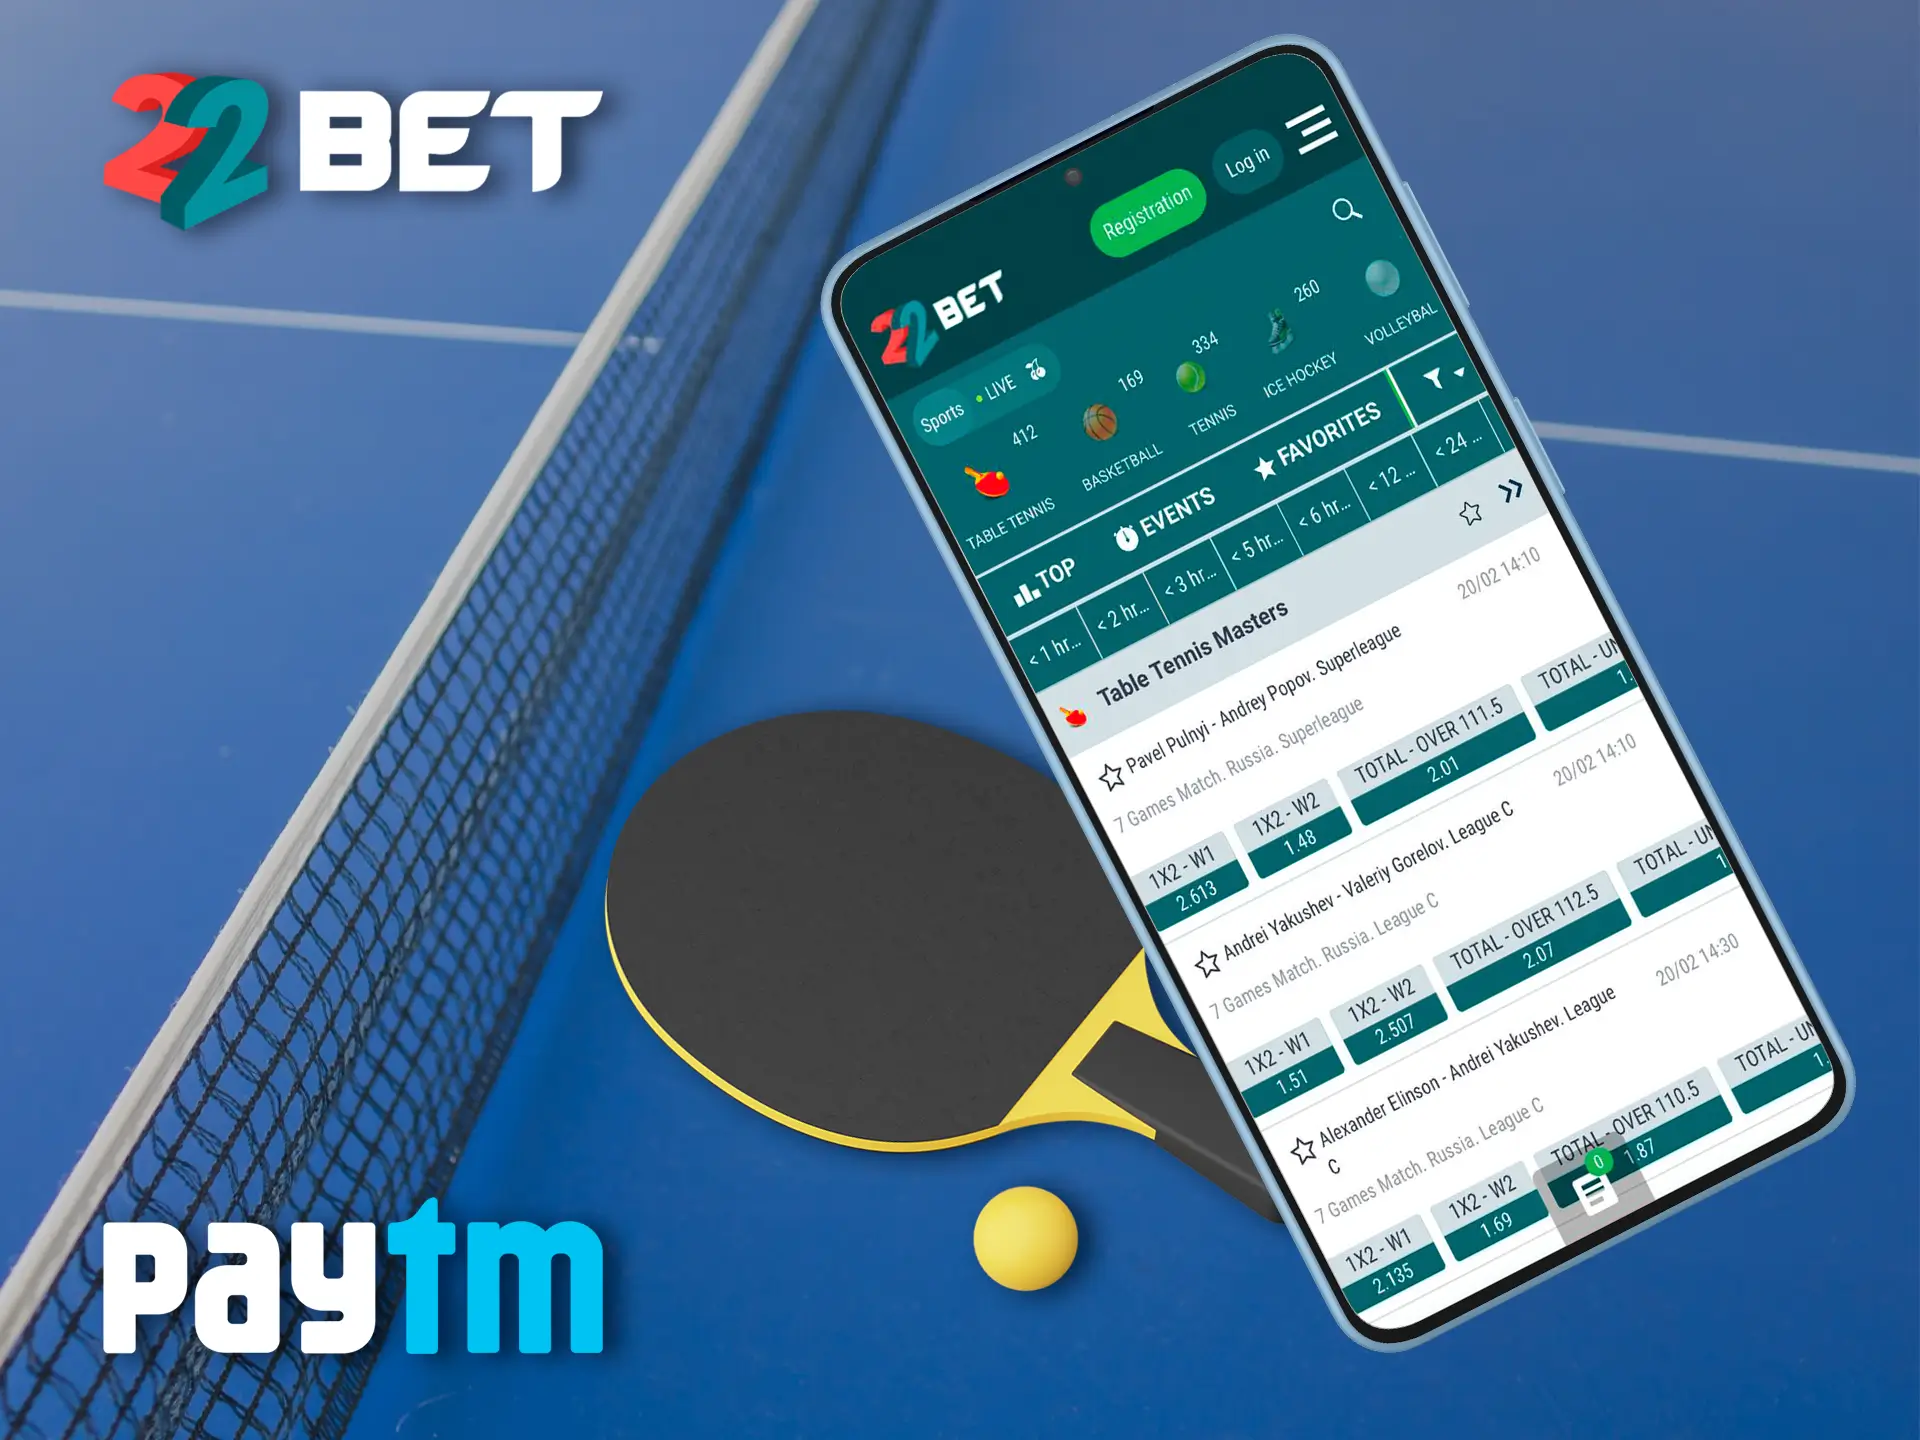 You'll find great design and fast commission-free top-ups in the 22Bet app.